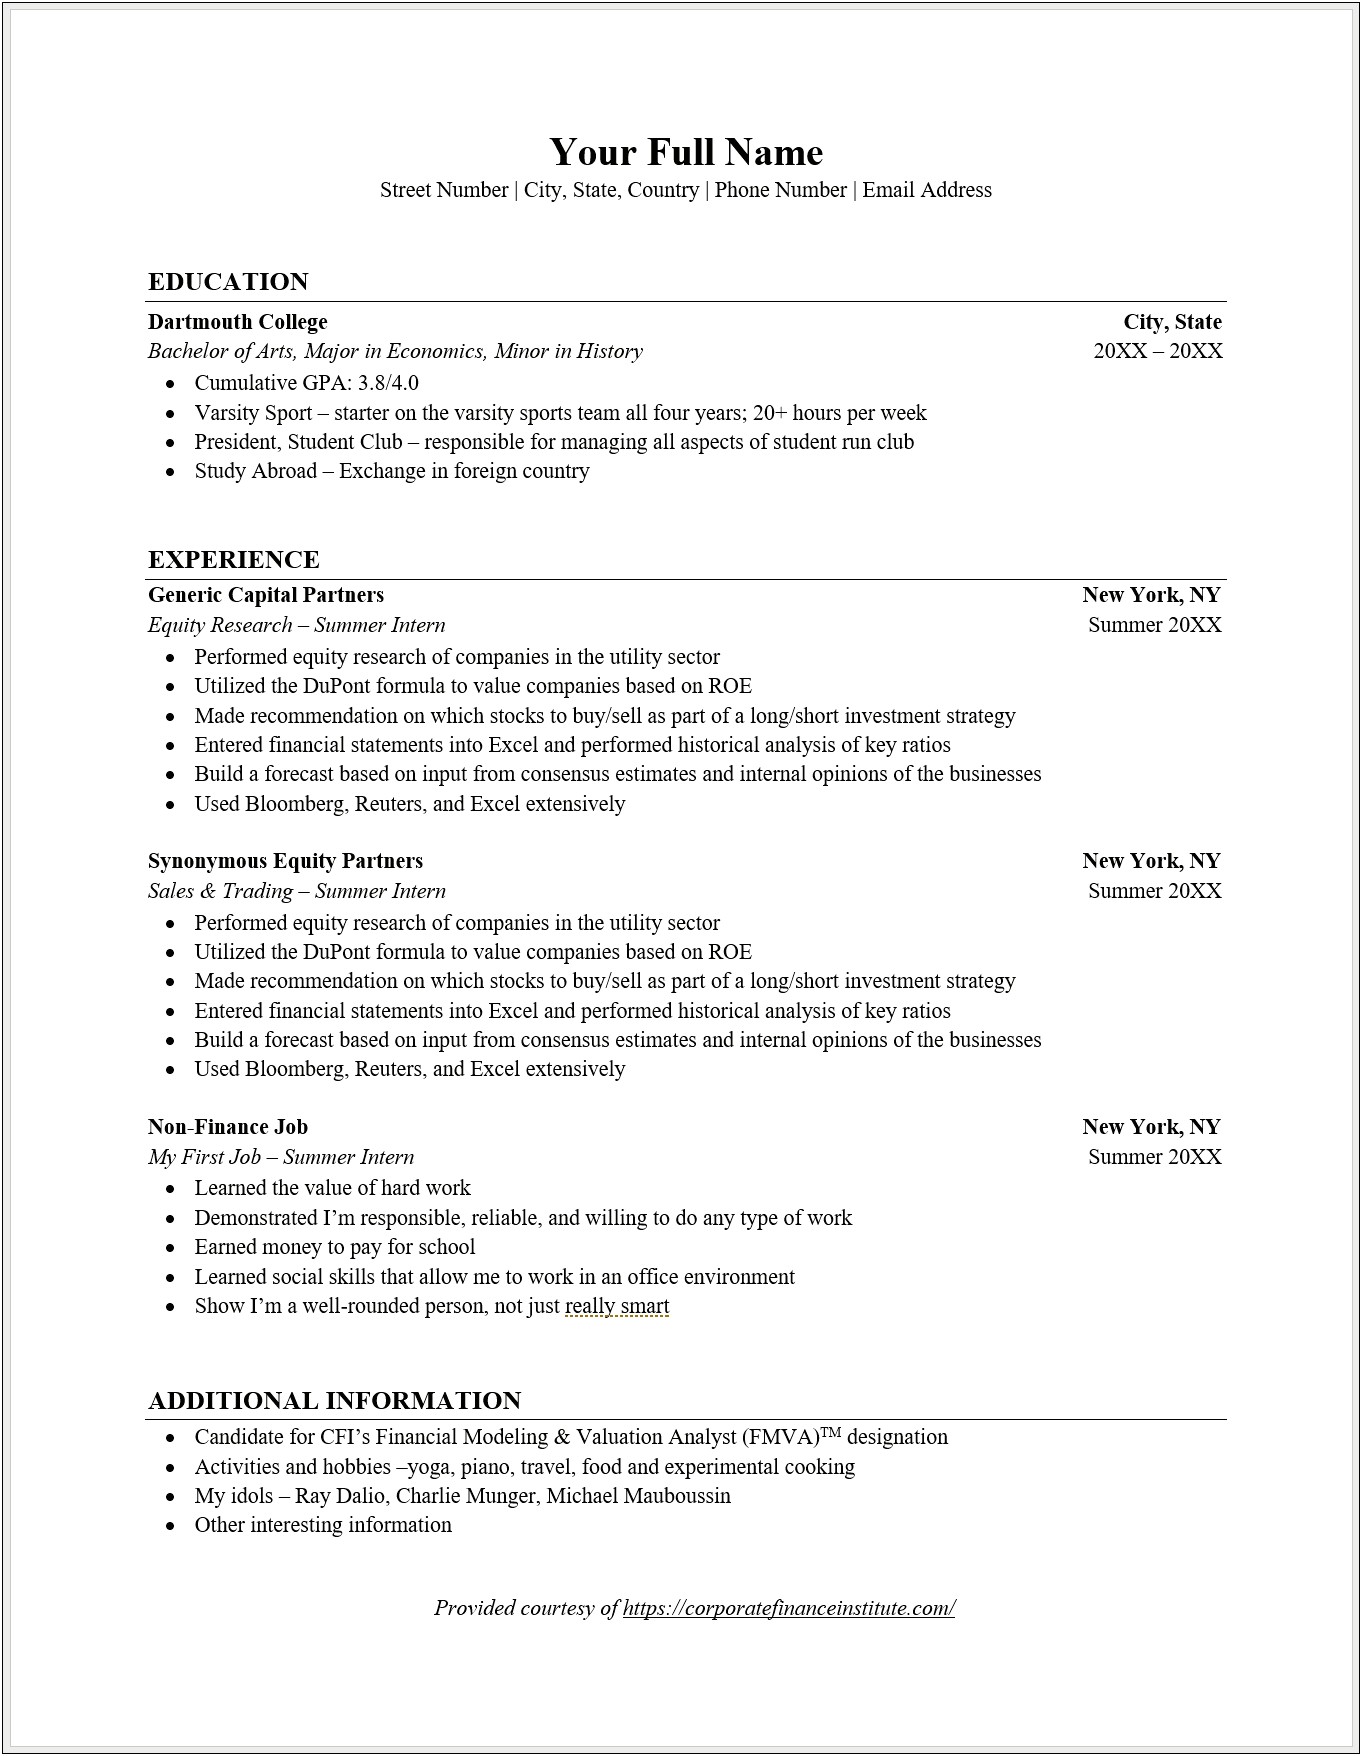 Types Of Job To List In Resumes